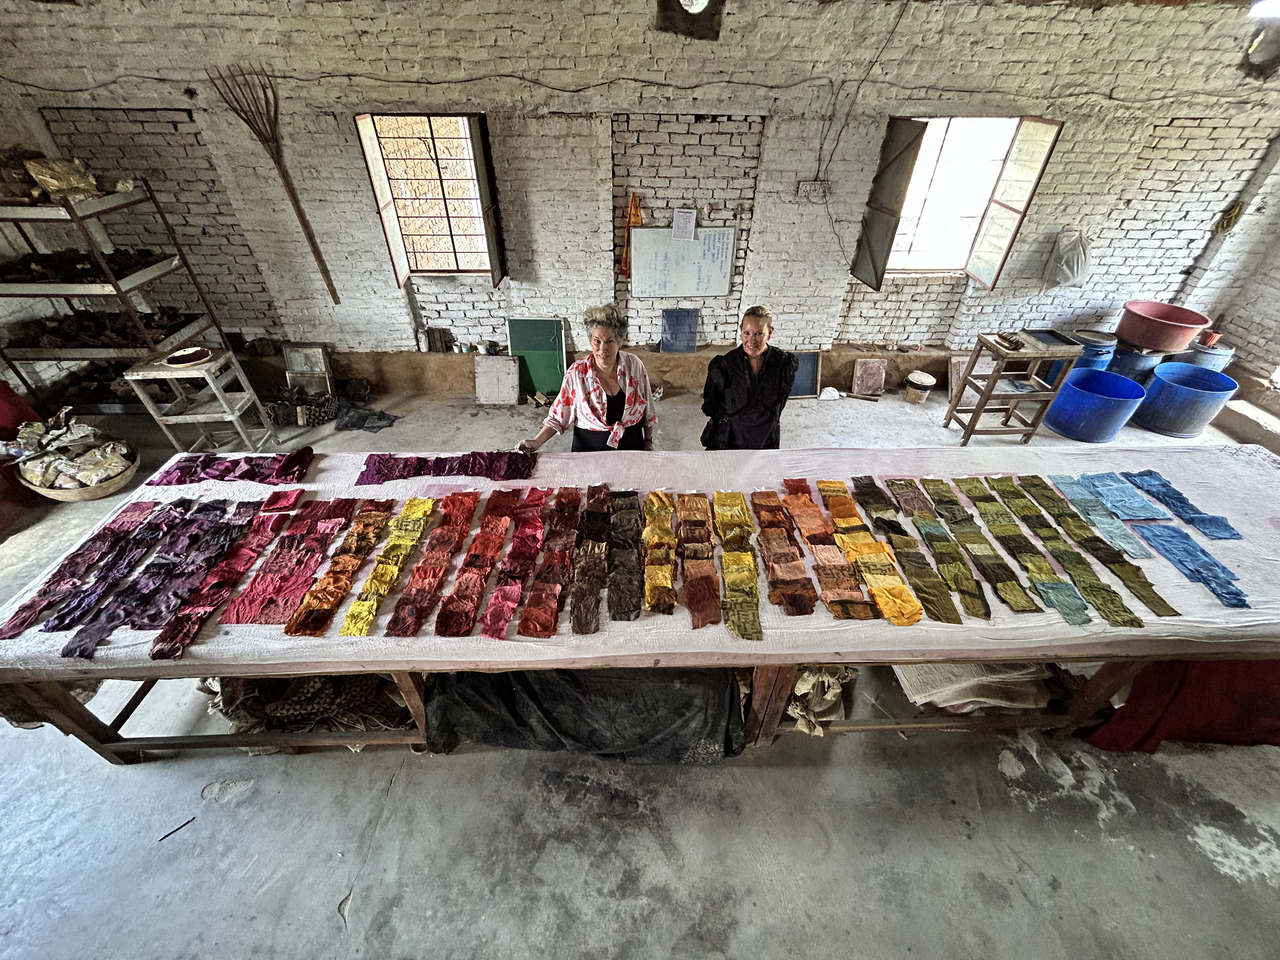 300 shades of natural dyes in 7 different fibers and combinations of 9 dyestuffs from plants, roots, bark, resins.